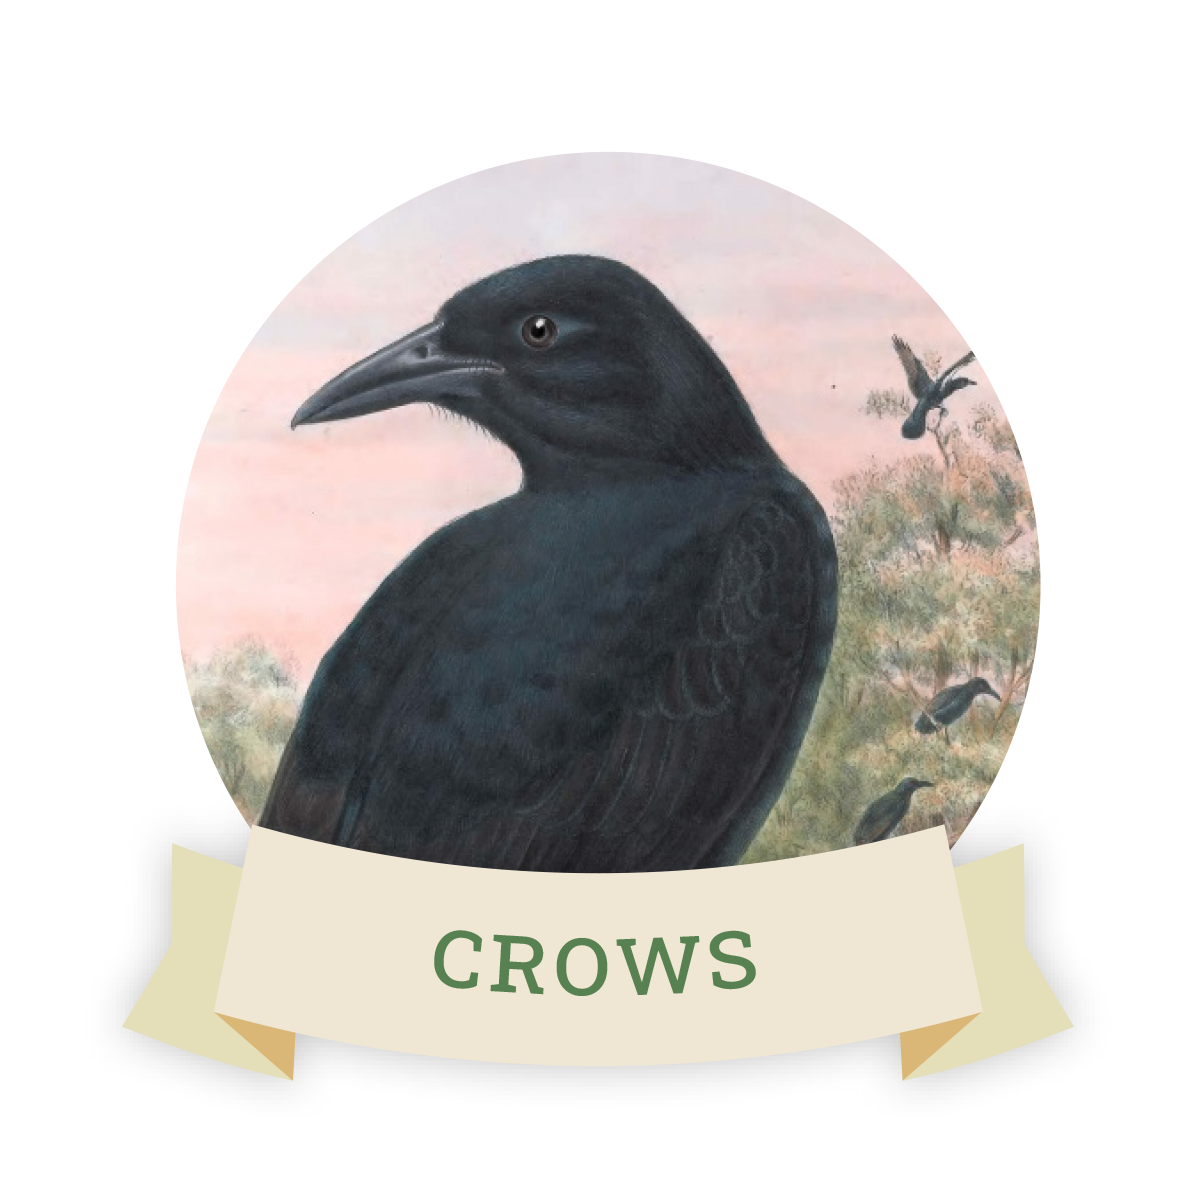 Image of a crow. Links to crow favorite food and feeders.